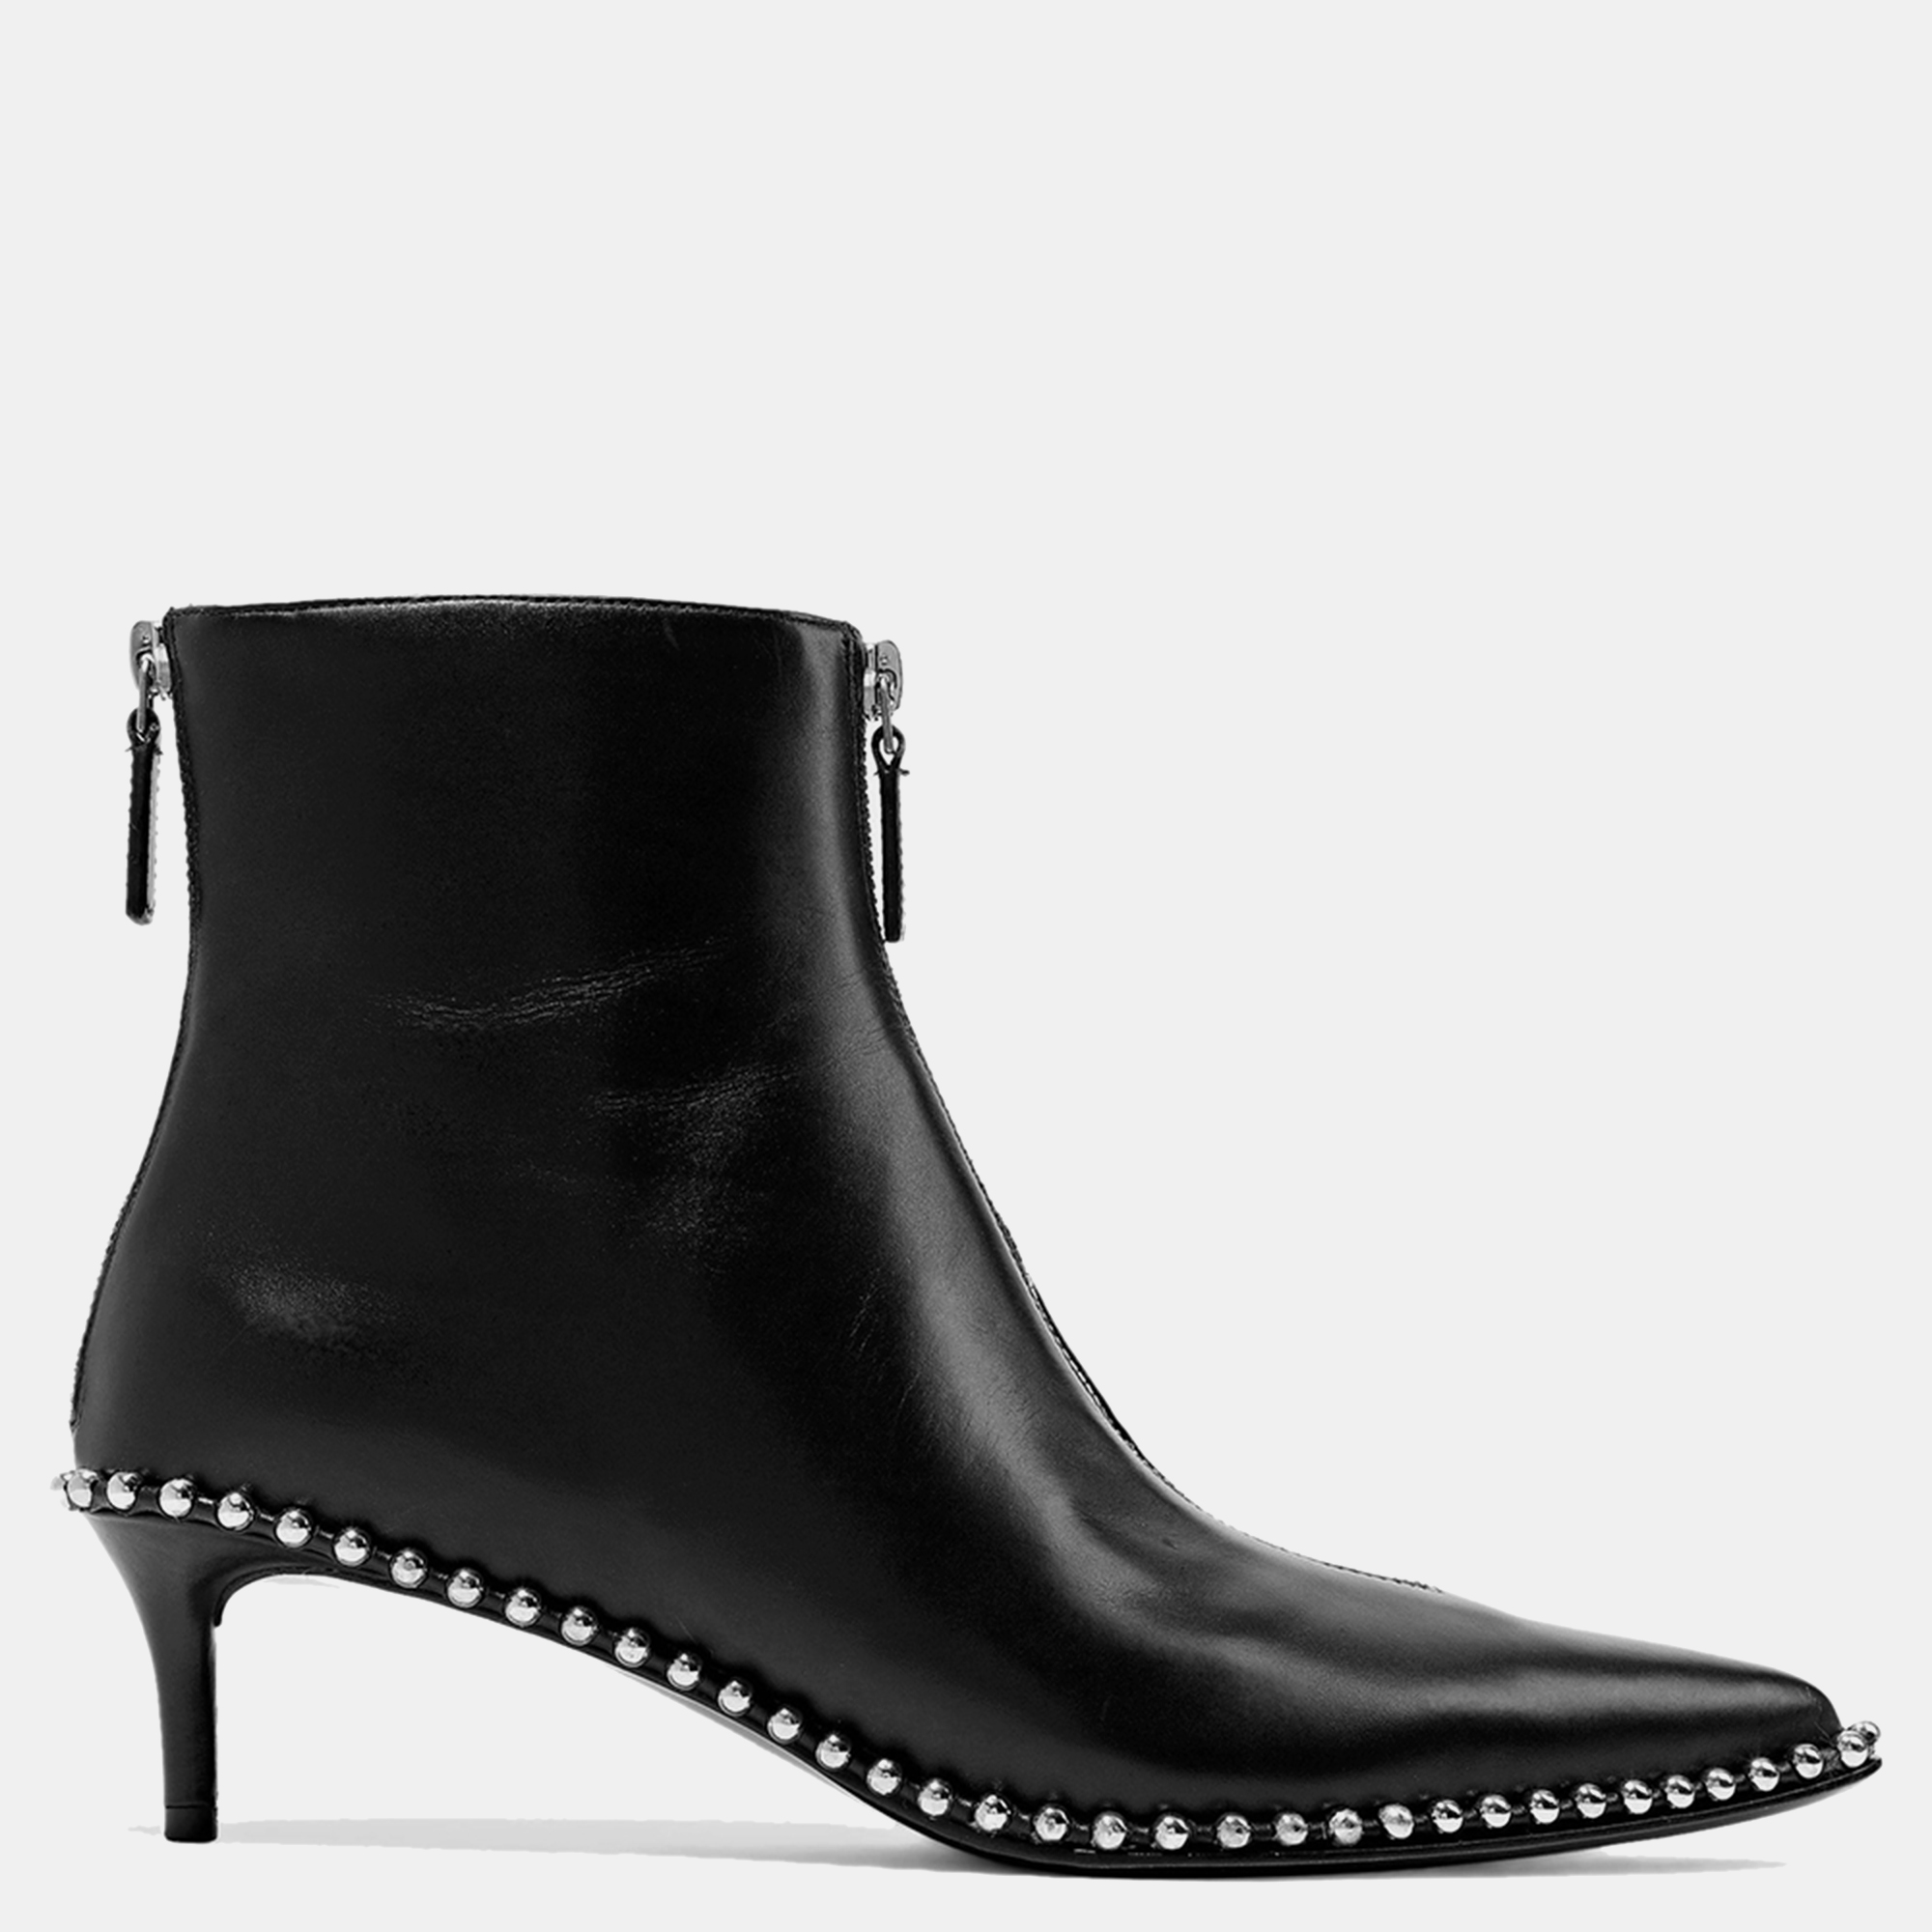 Alexander wang leather ankle boots size 37